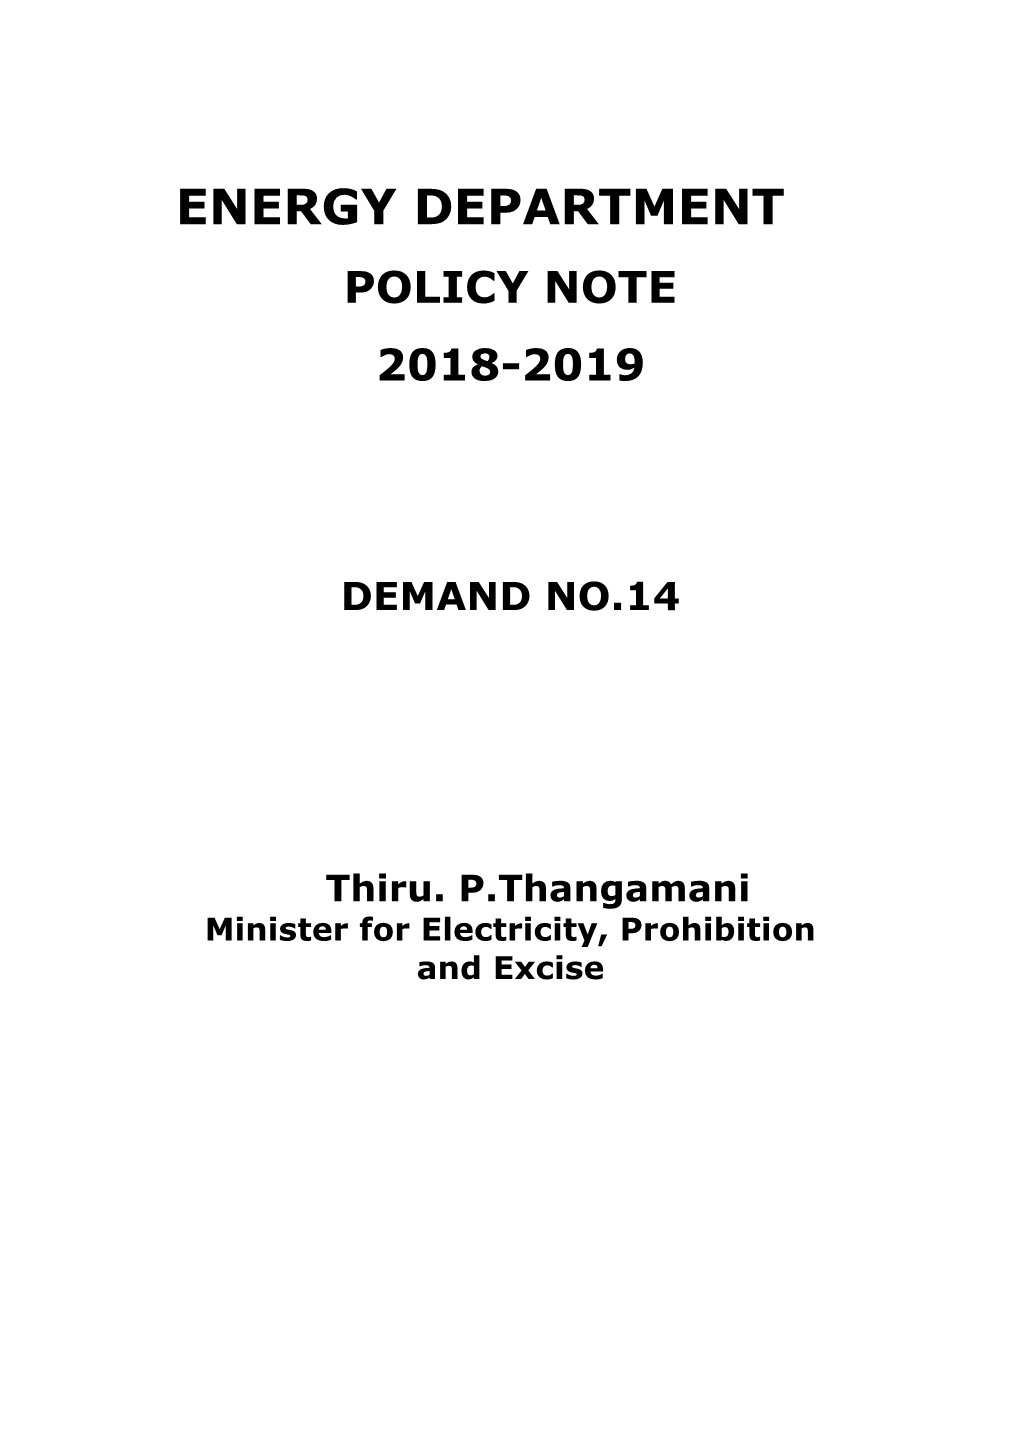 Energy Department Policy Note 2018-2019